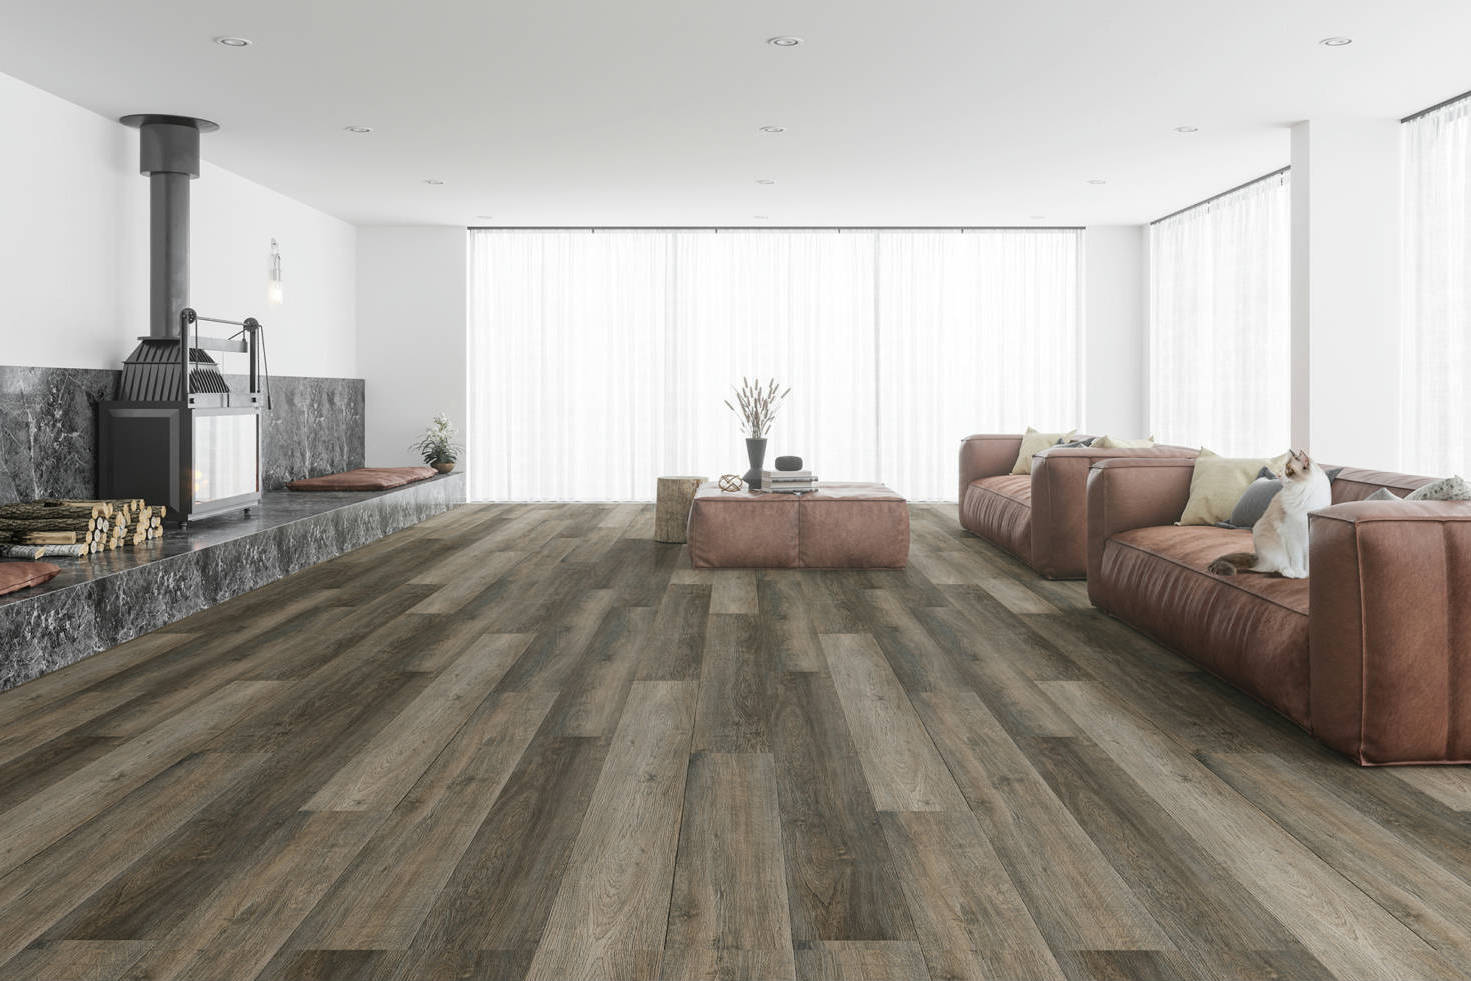 Timber Ridge Gold 12 3 | Qualis Ceramica | Luxury Tile and Vinyl at affordable prices